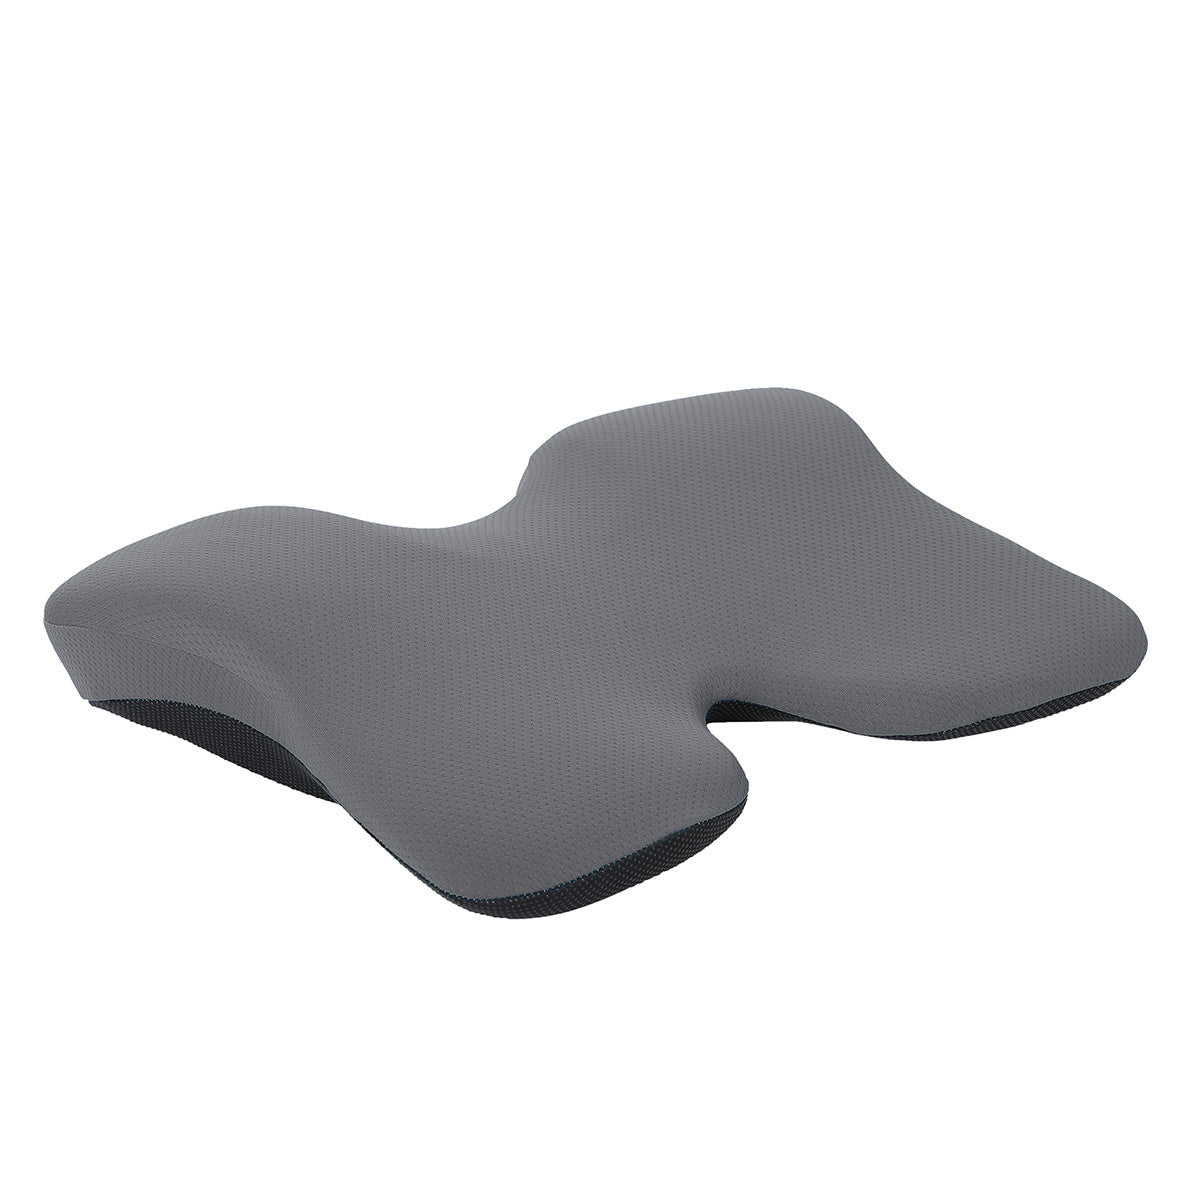 Ergoworks - EW-SCPI - Comfort Upright Back Rest Seat Cushion